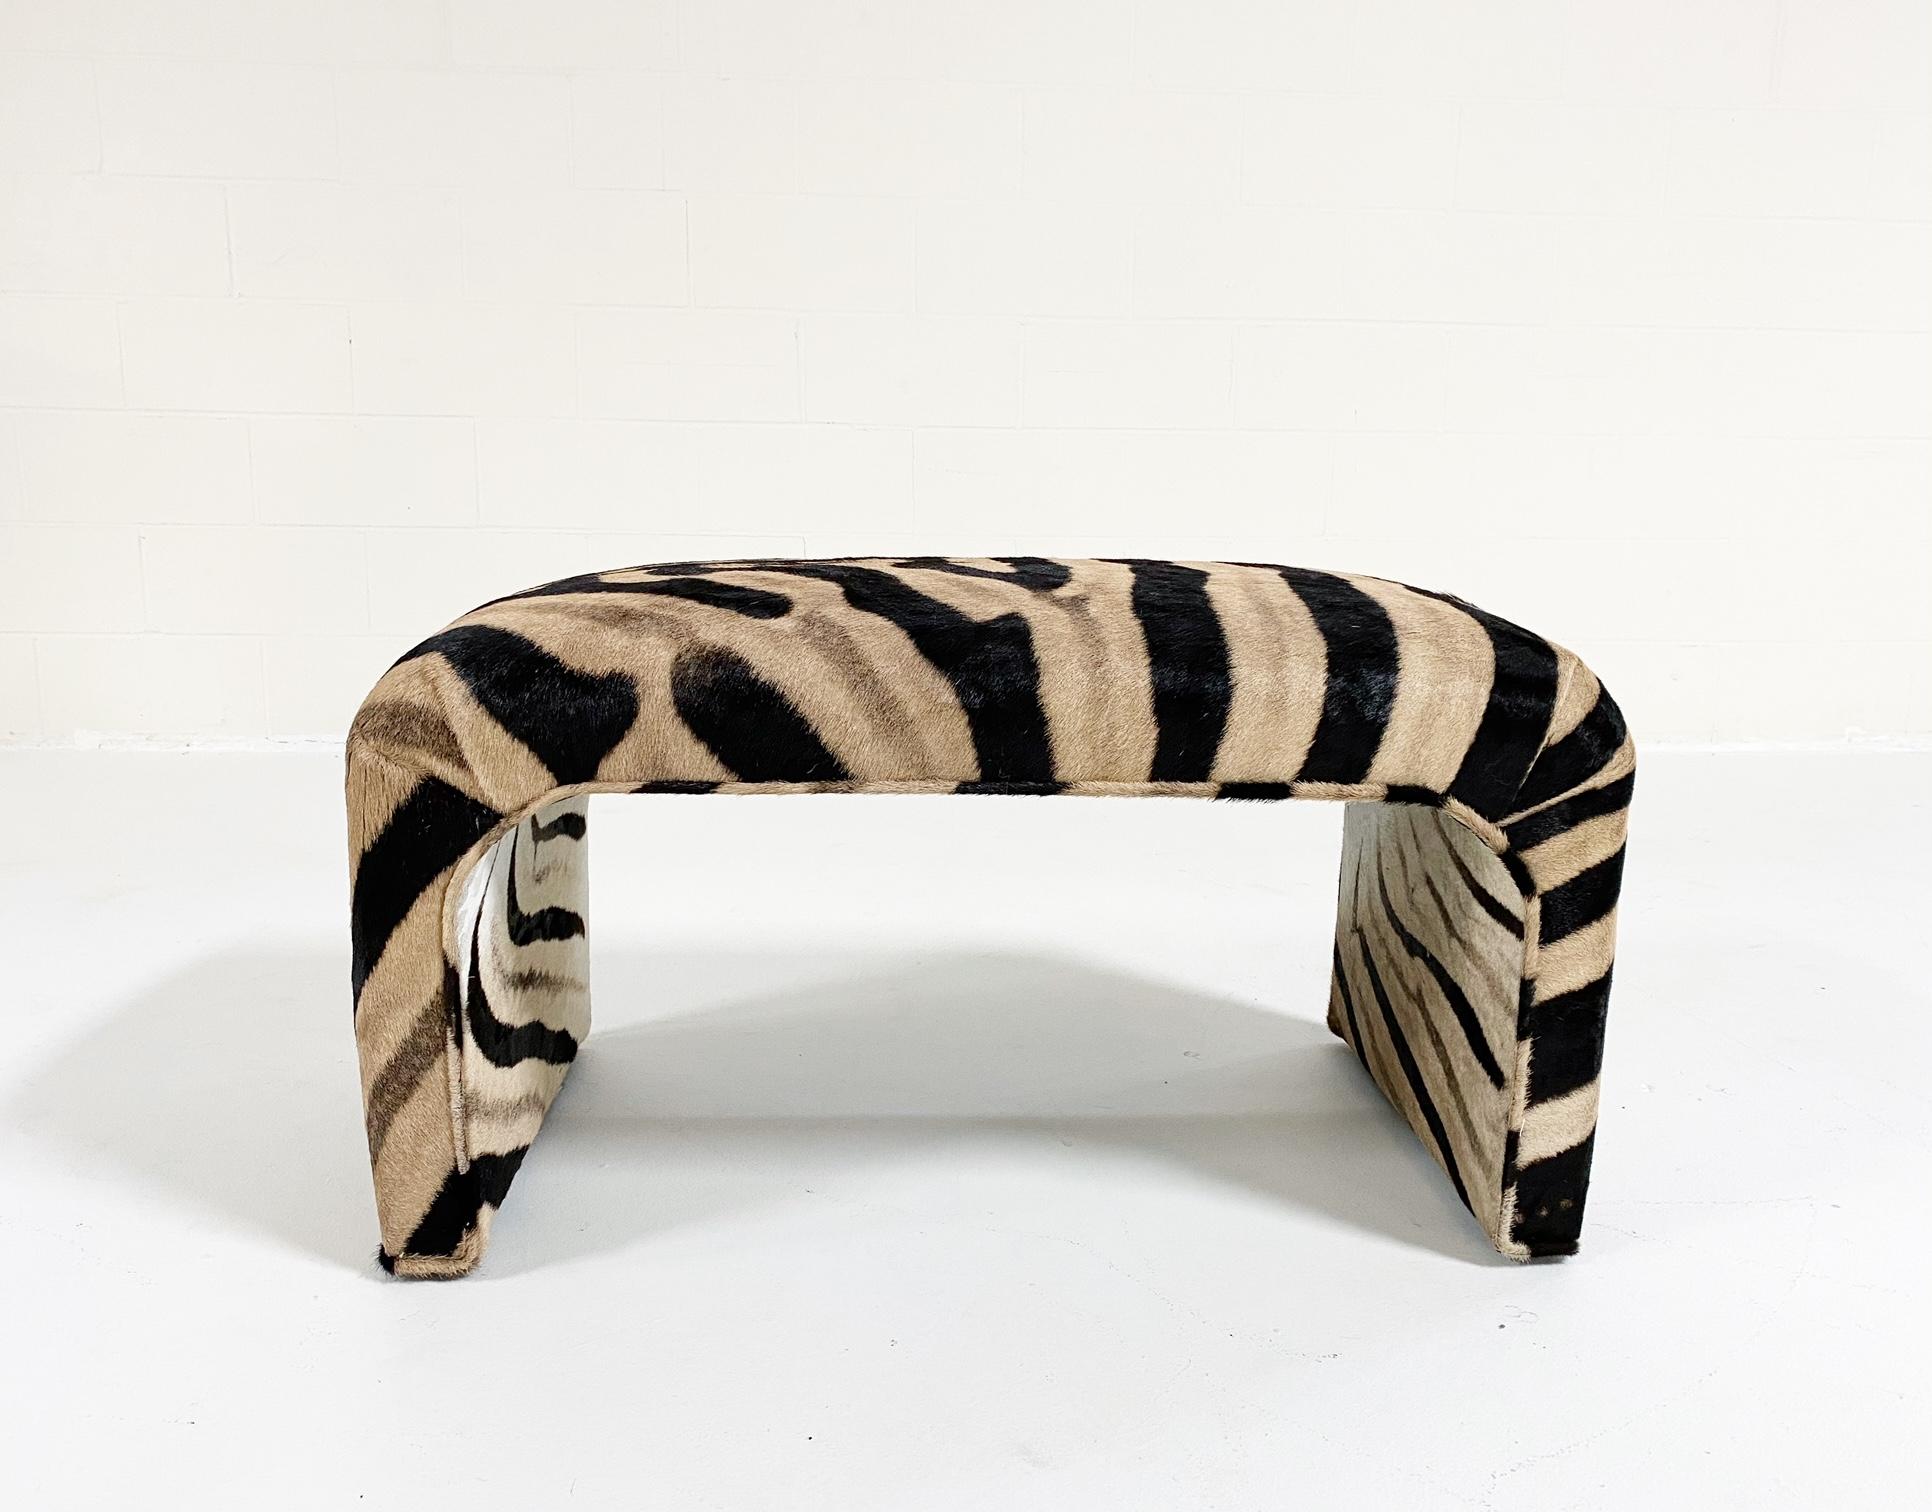 The entire piece has been meticulously reupholstered in zebra hide. It's a beautiful piece and the perfect accent in any room.